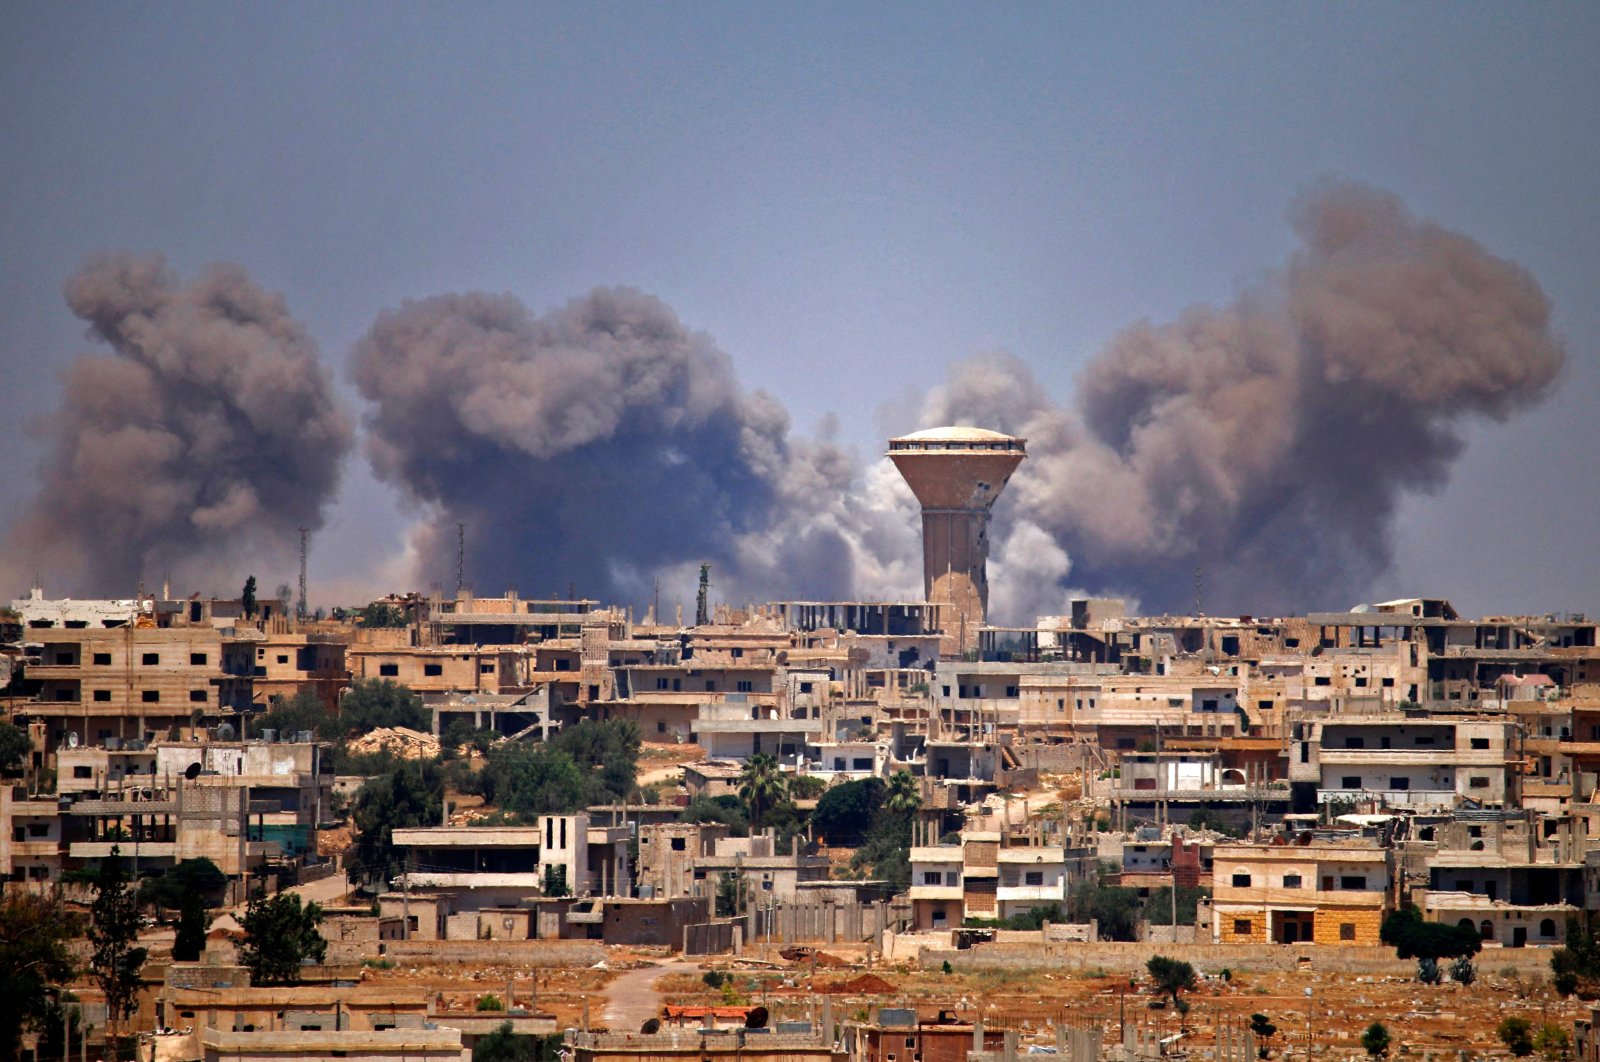 Smoke rises above opposition-held areas of the city of Daraa during reported airstrikes by Syrian regime forces, southern Syria, July 5, 2018. (AFP Photo)